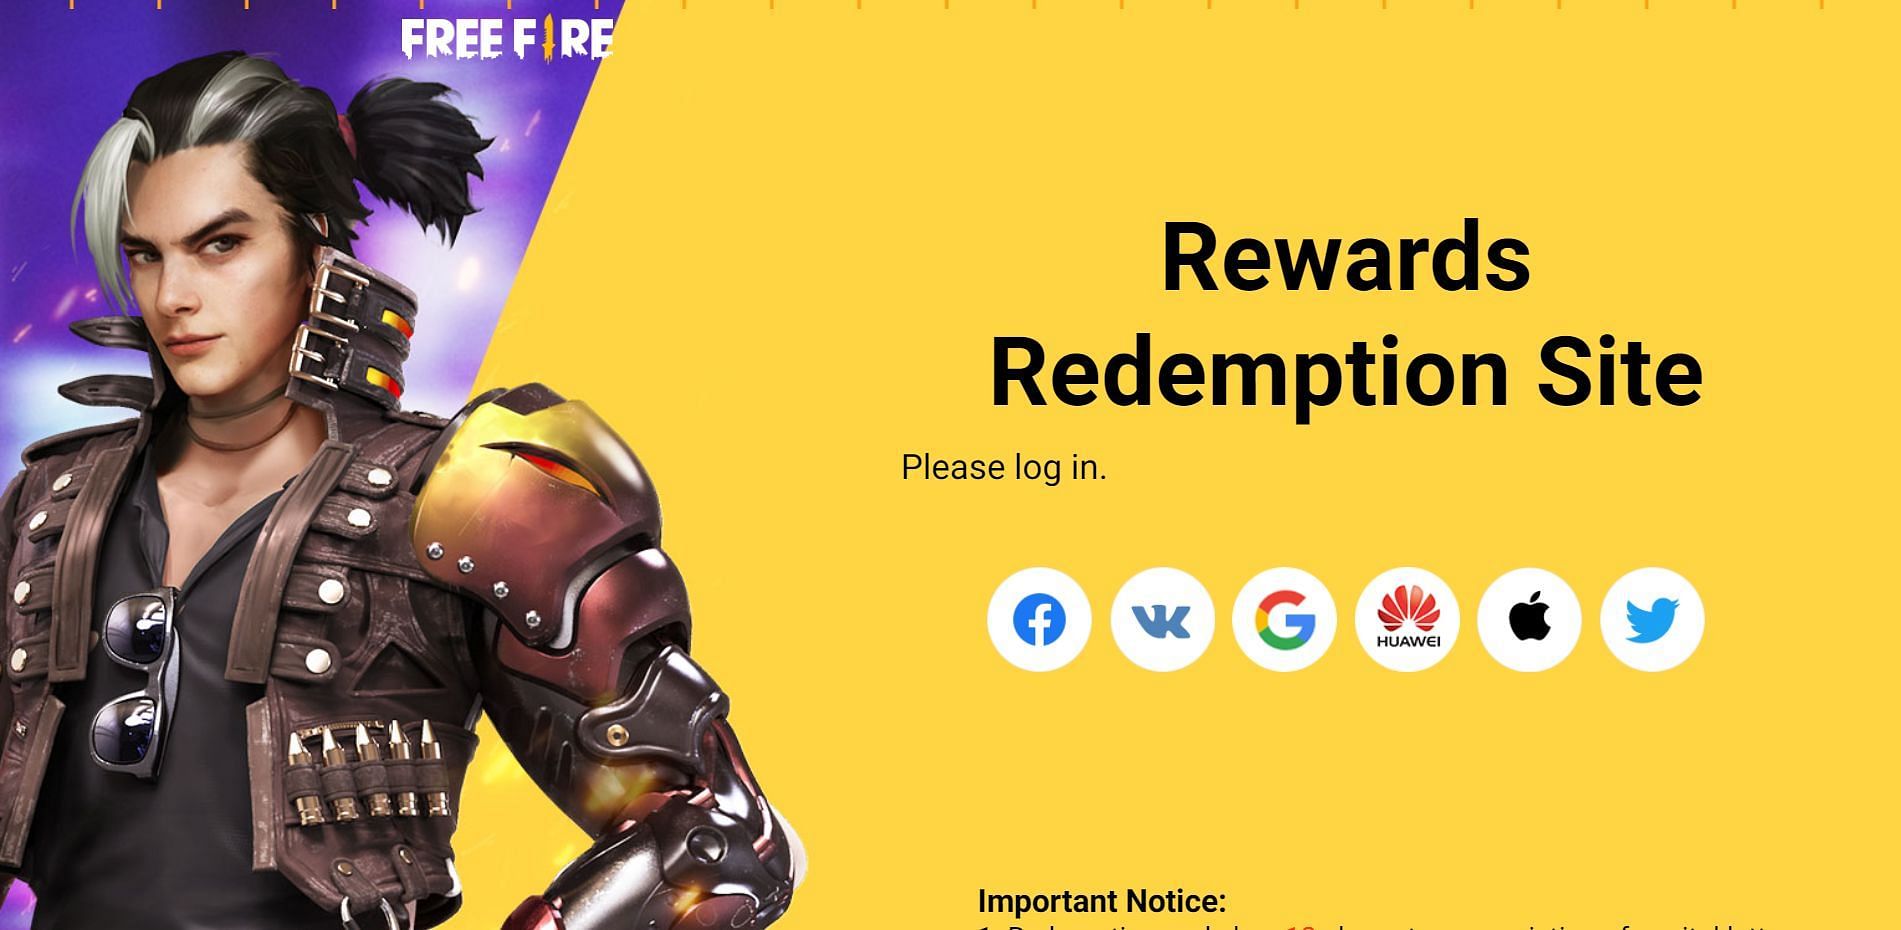 Sign in on the Rewards Redemption Site of the game (Image via Garena)